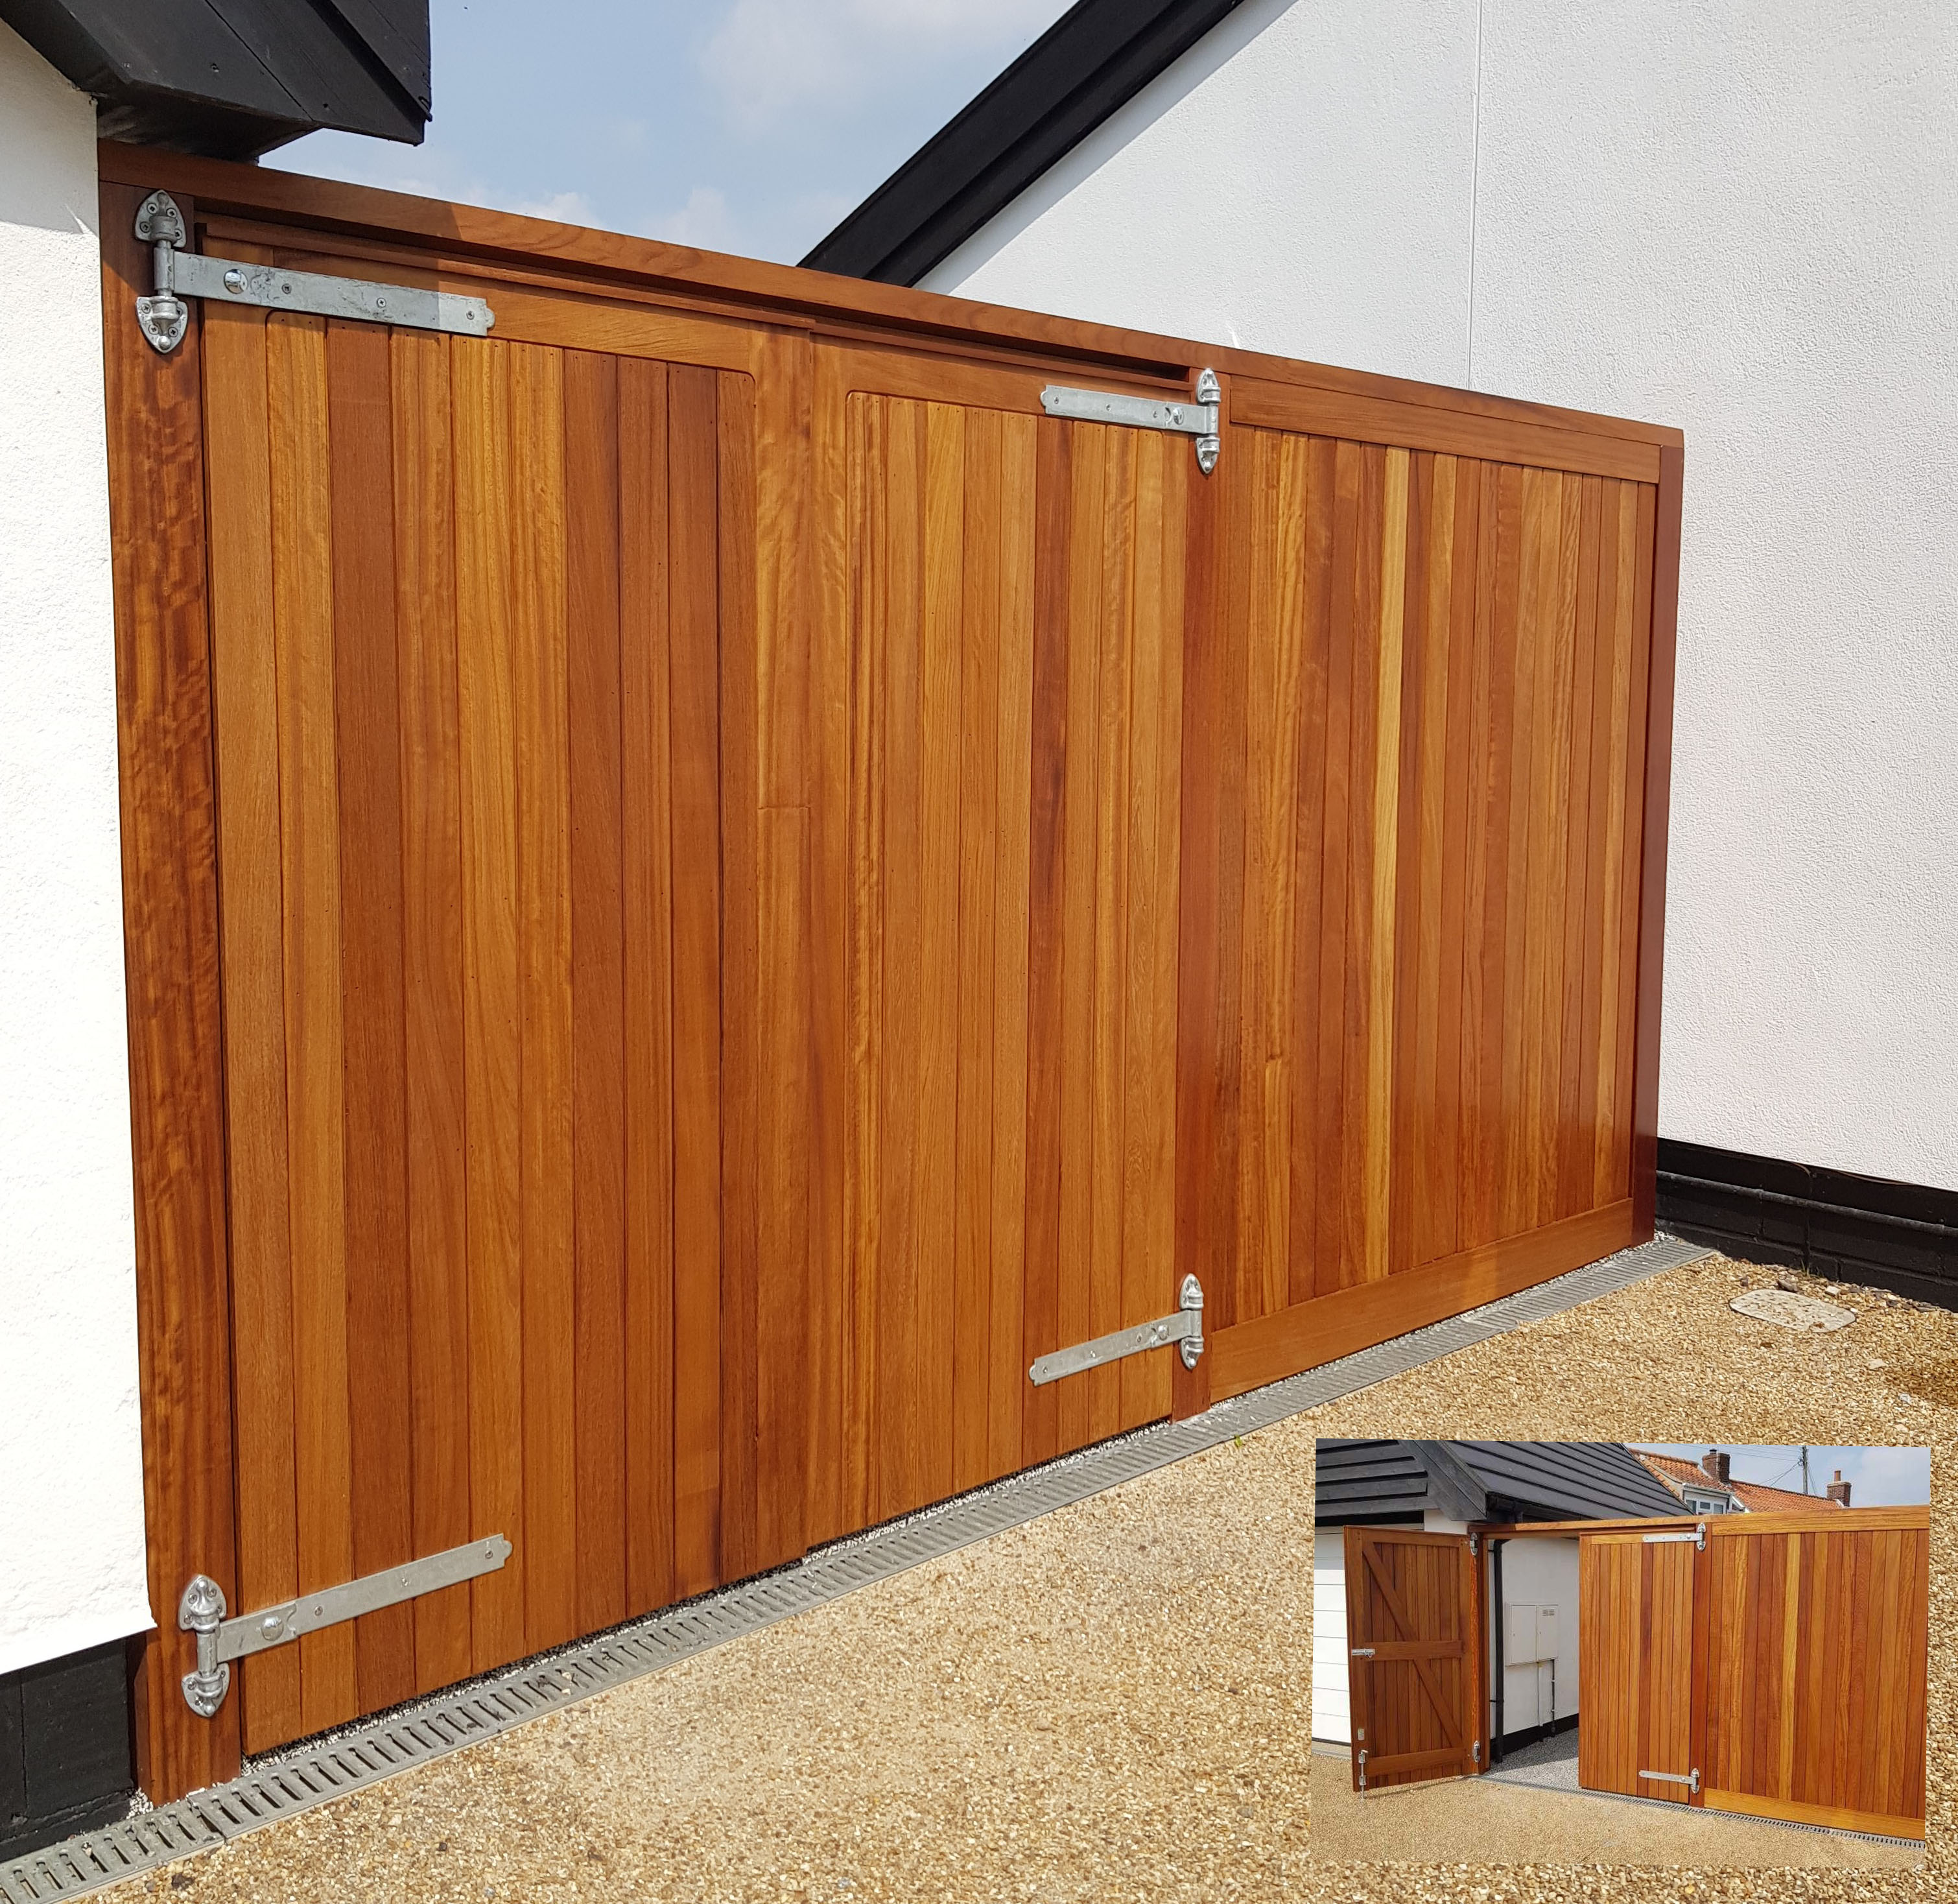 Blyth gates with side panel in oiled iroko with header rail